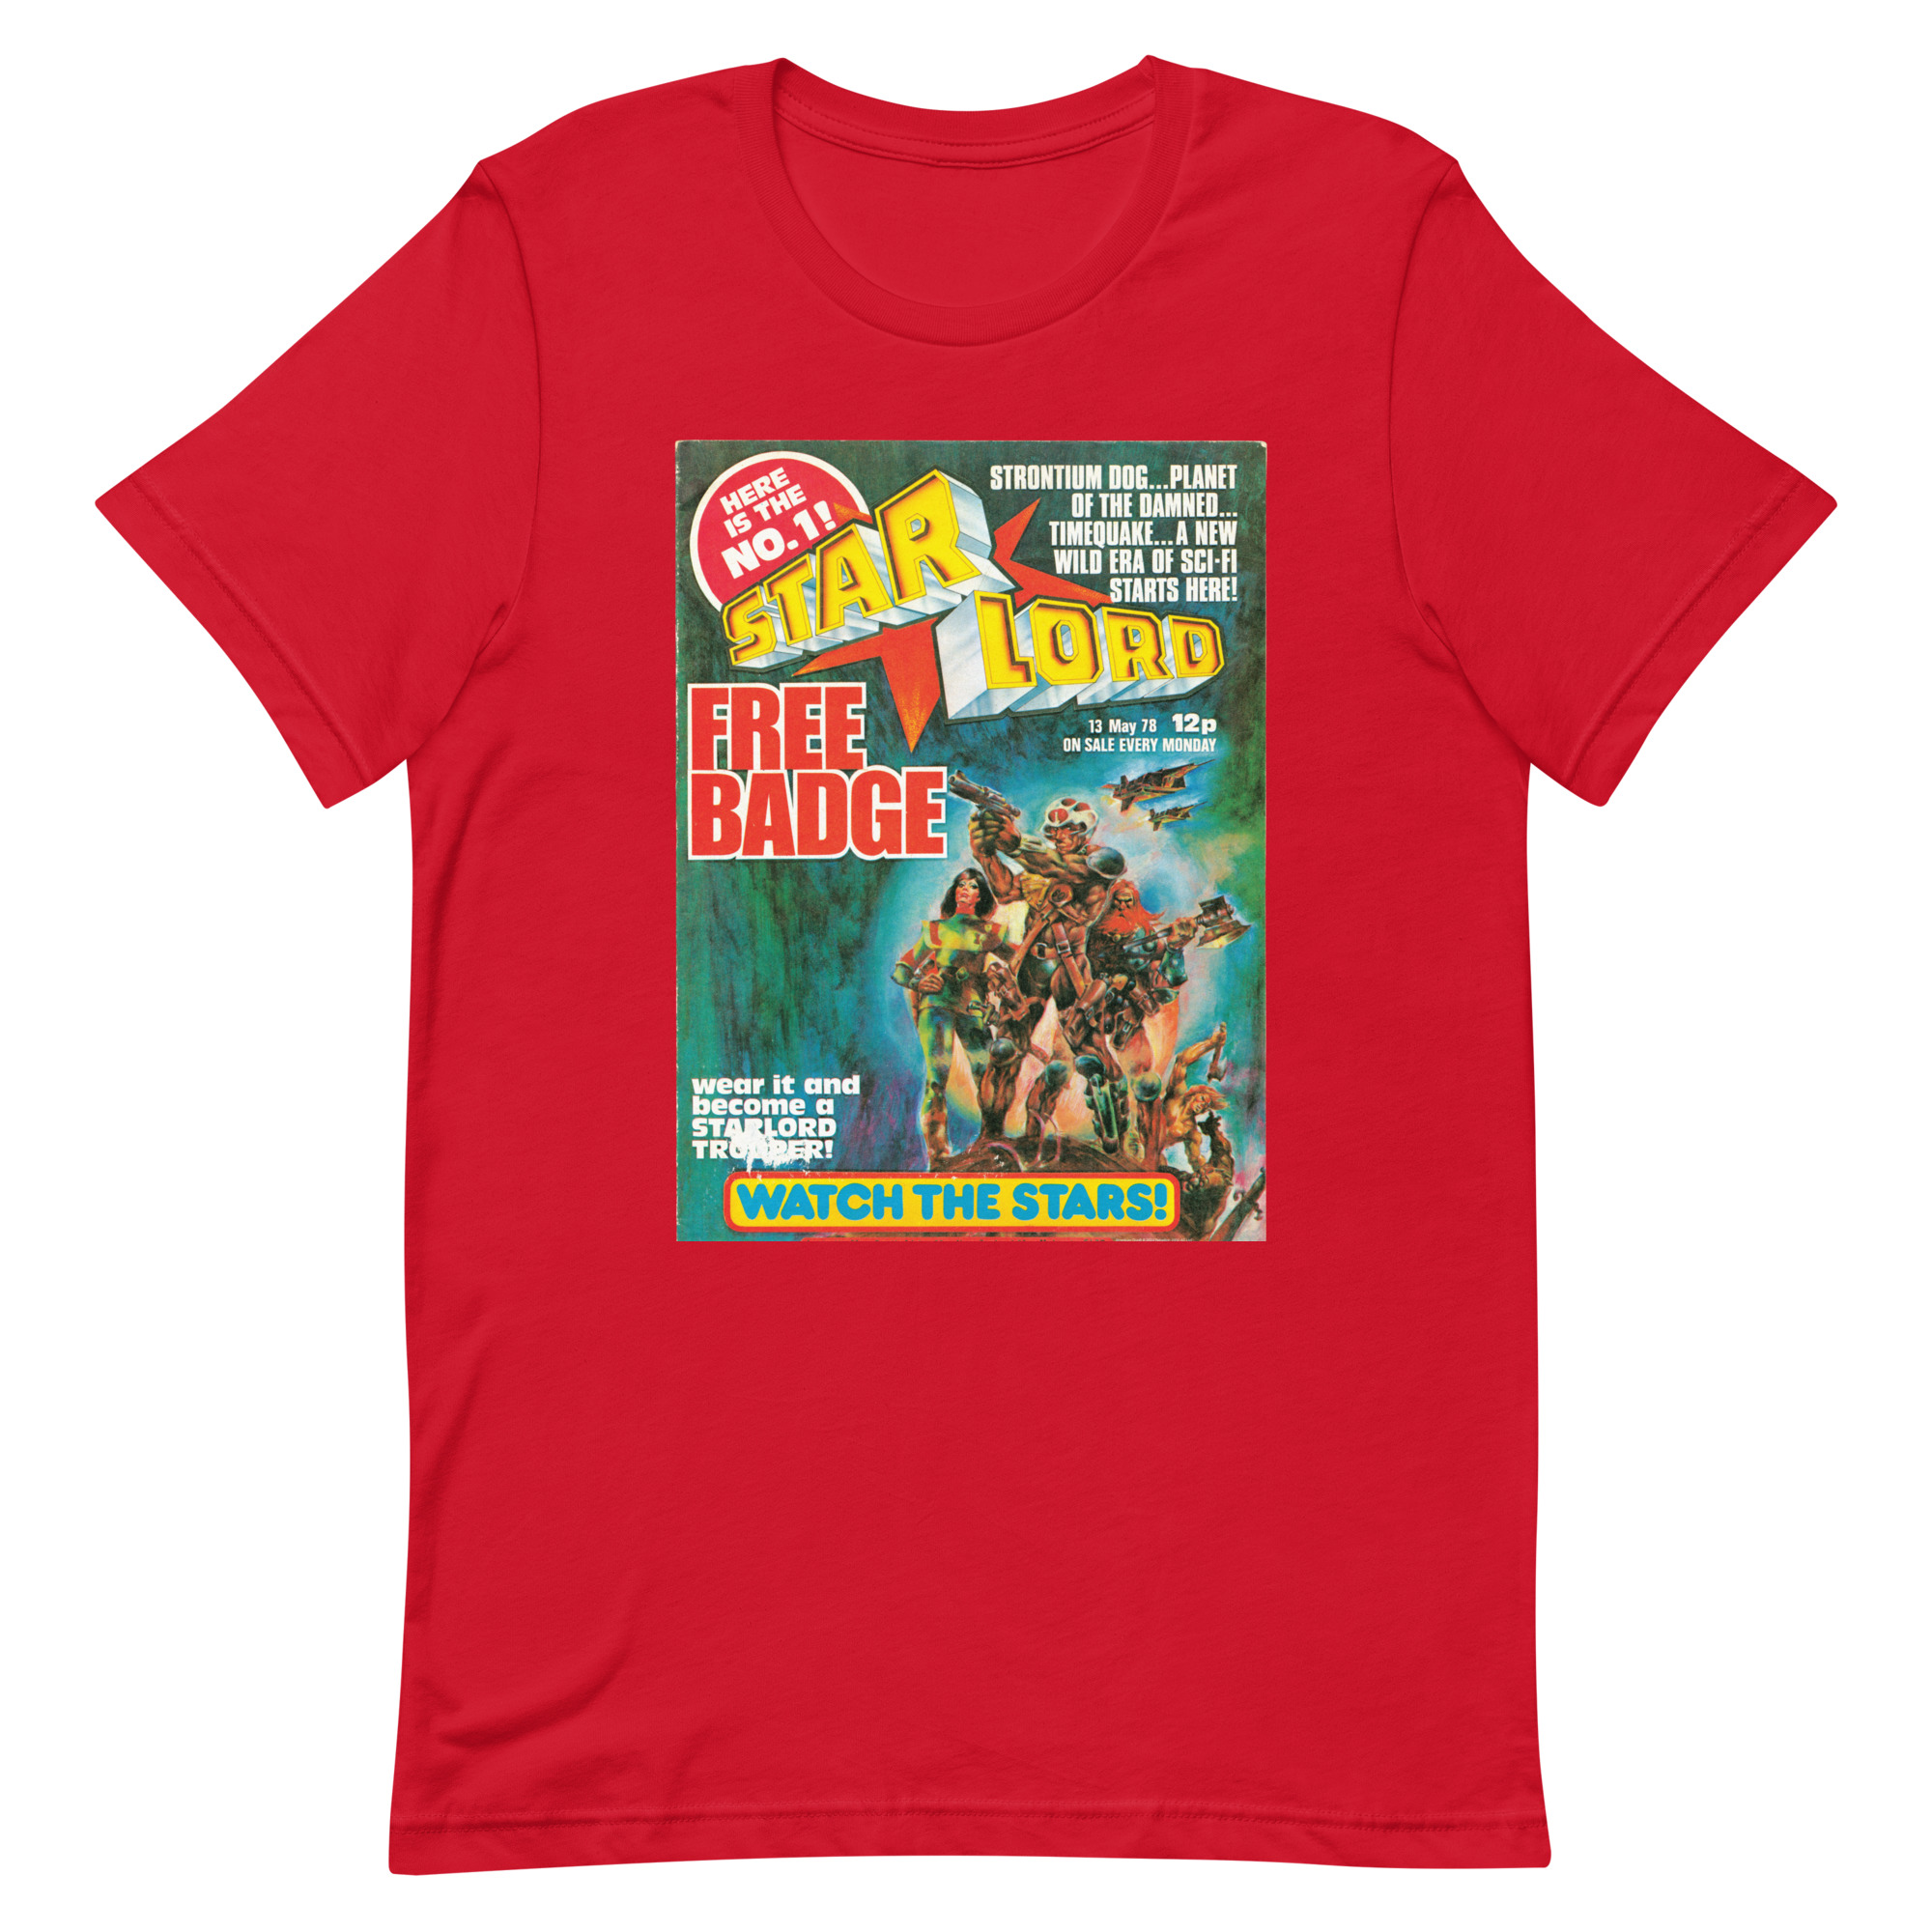 Starlord #1 T-Shirt (Red)